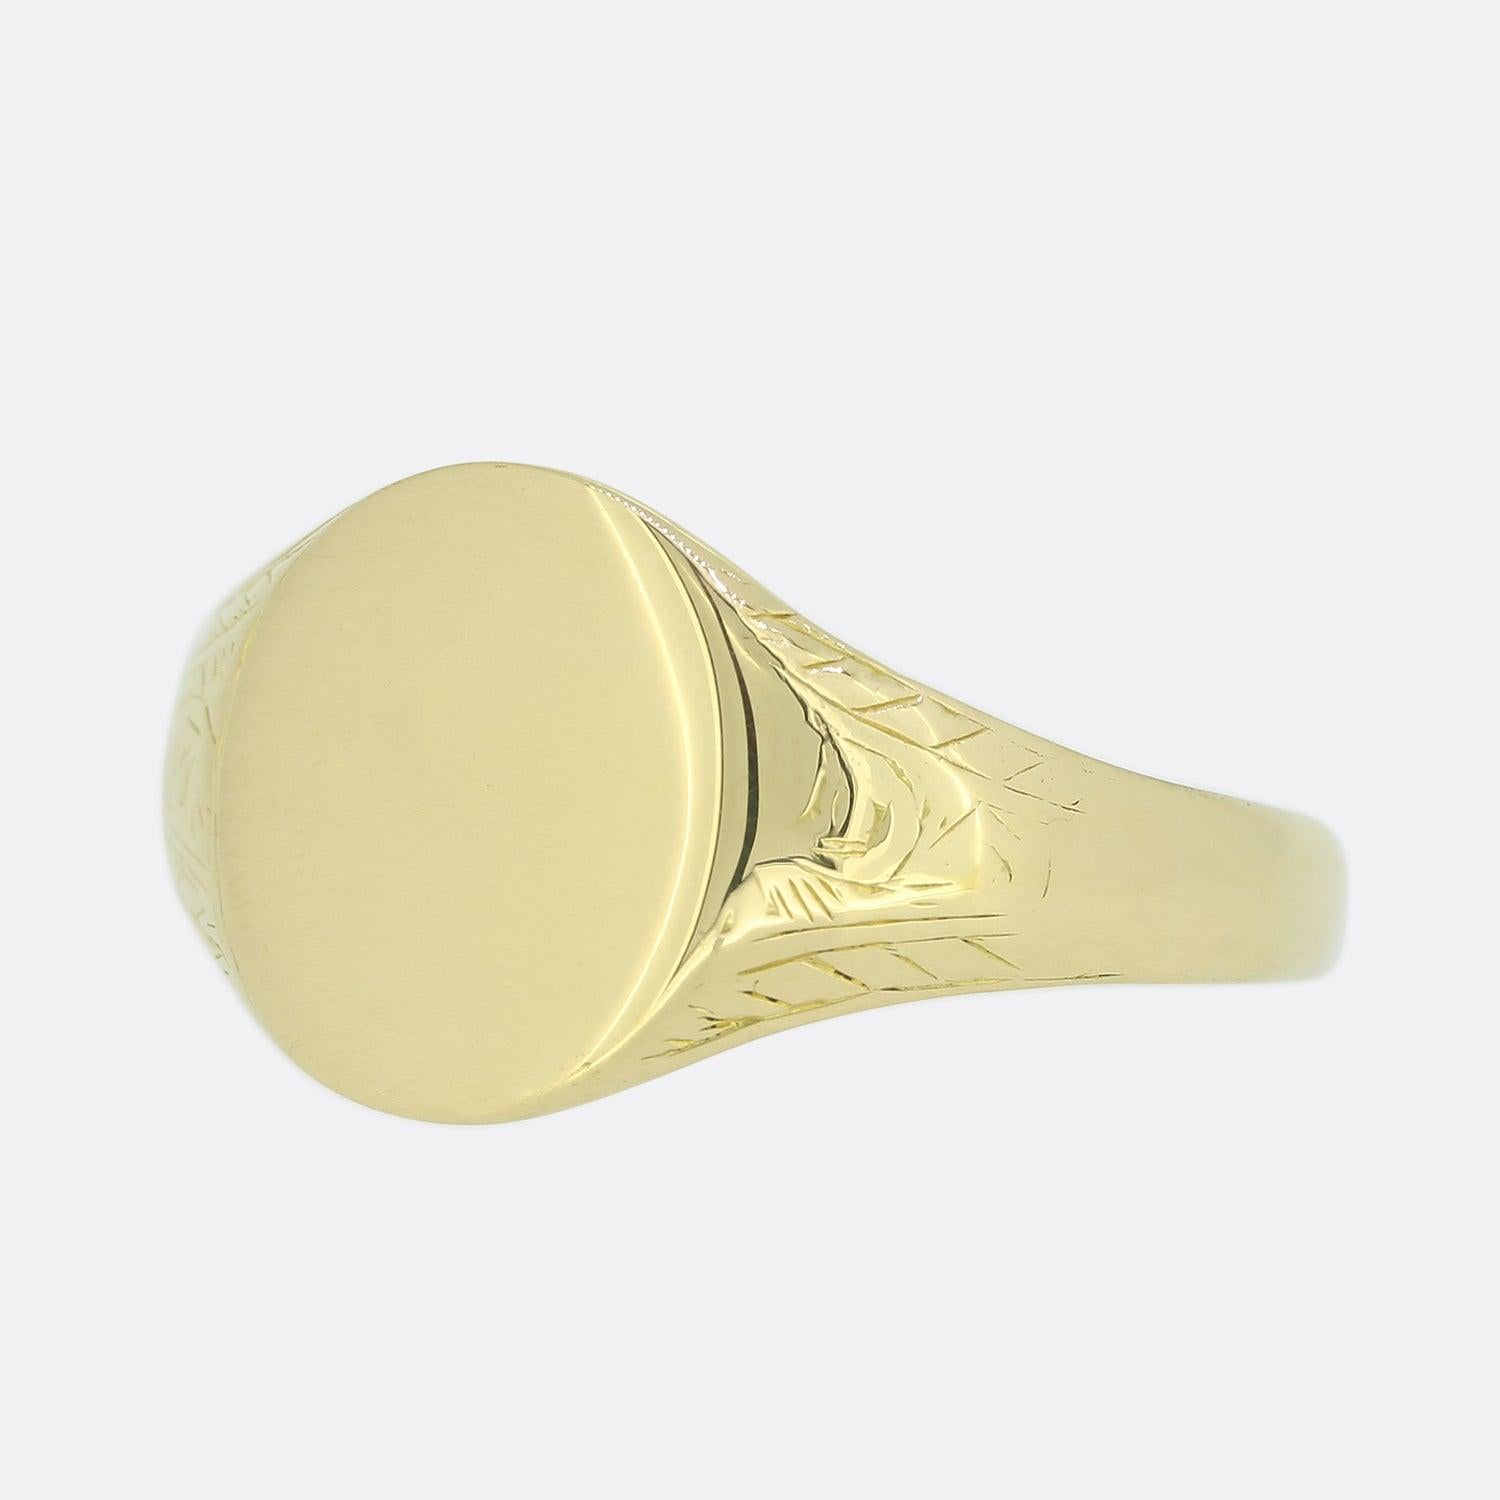 This is a Vintage 18ct yellow gold signet ring. The ring features an oval face with lightly patterned shoulders. The ring is fully hallmarked 18ct but the date letter has faded.

Condition: Used (Very Good)
Weight: 3.6 grams
Ring Size: T (61)
Face